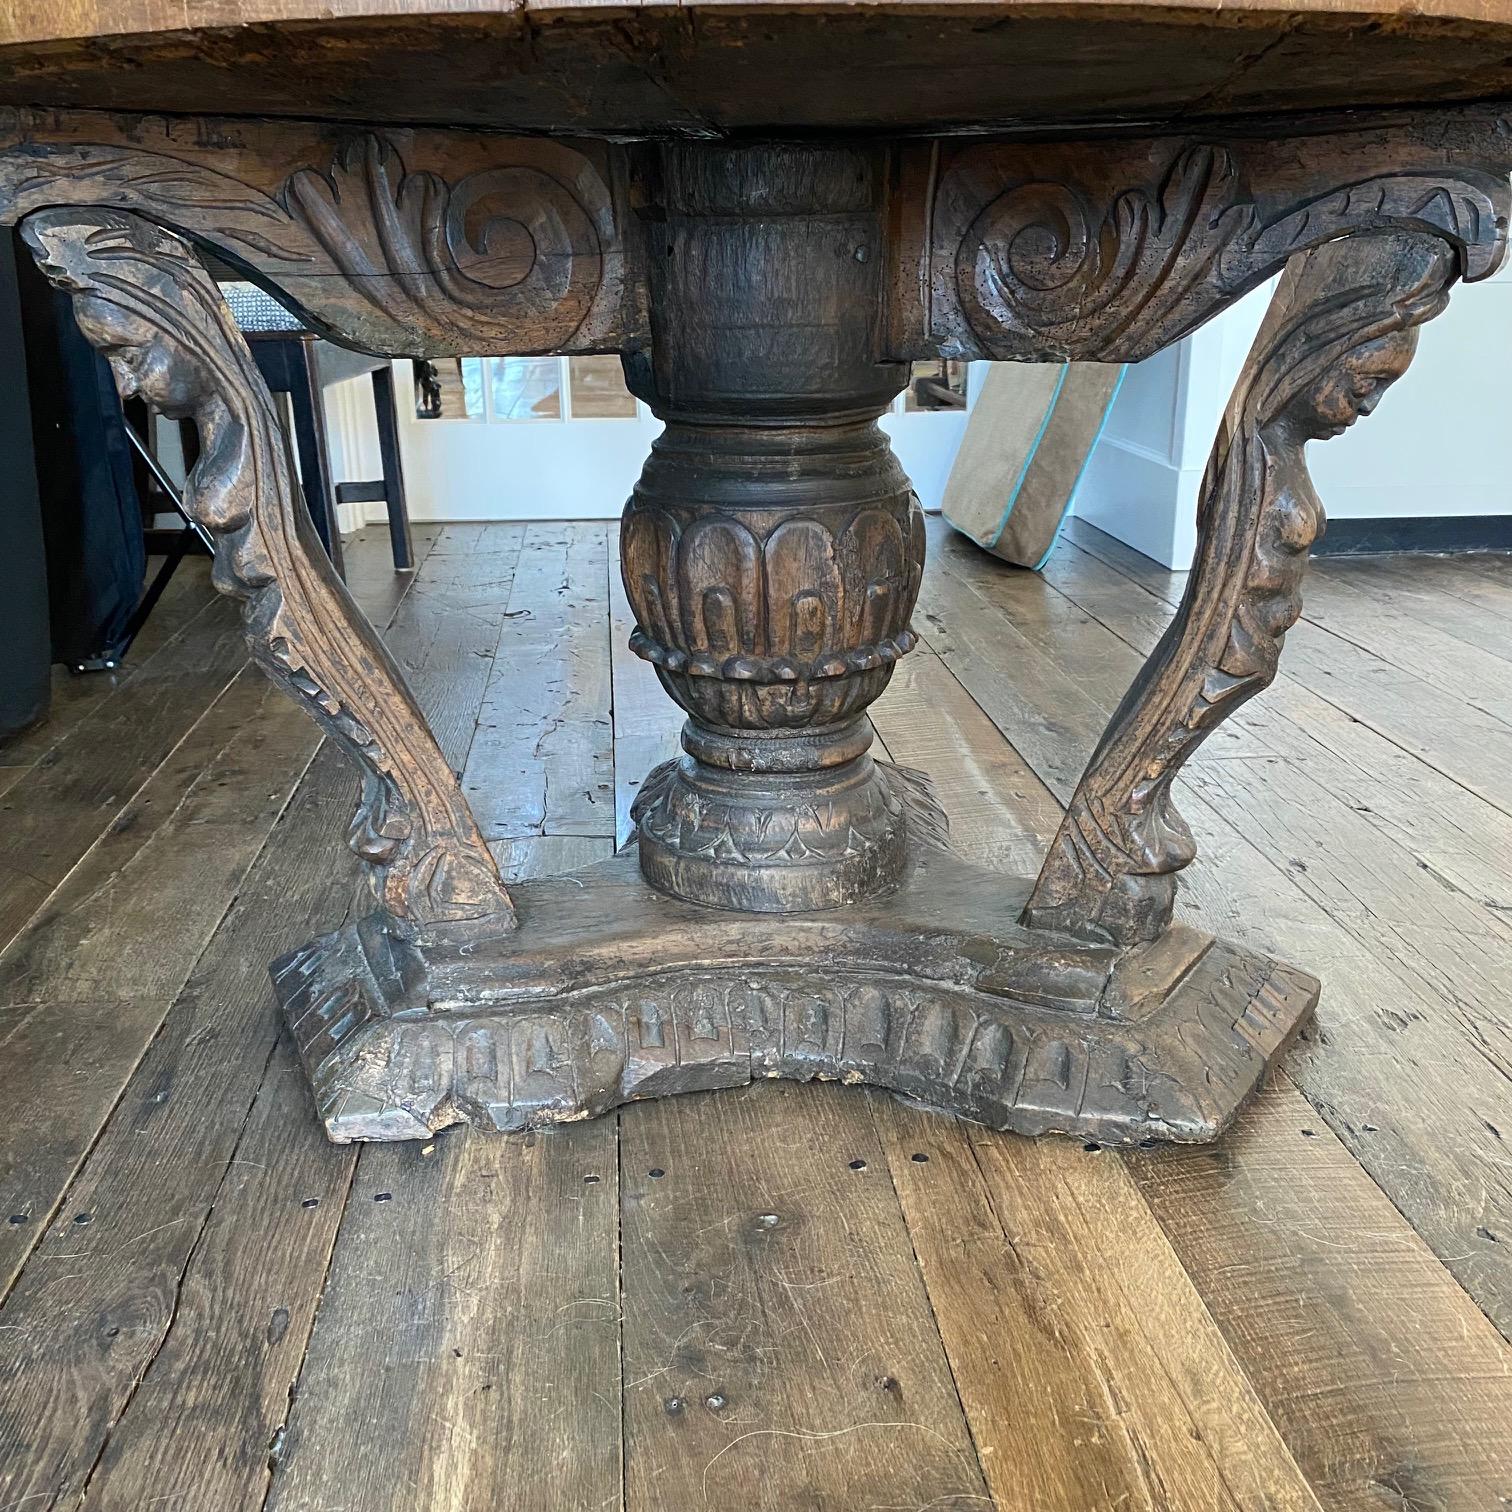 Comprised of an inlaid round walnut top (with new glass top) over an early figural carved base, this 18th century entry table is truly a piece of art. Once featured in a prominent East Coast design magazine, it would display beautifully with a tall